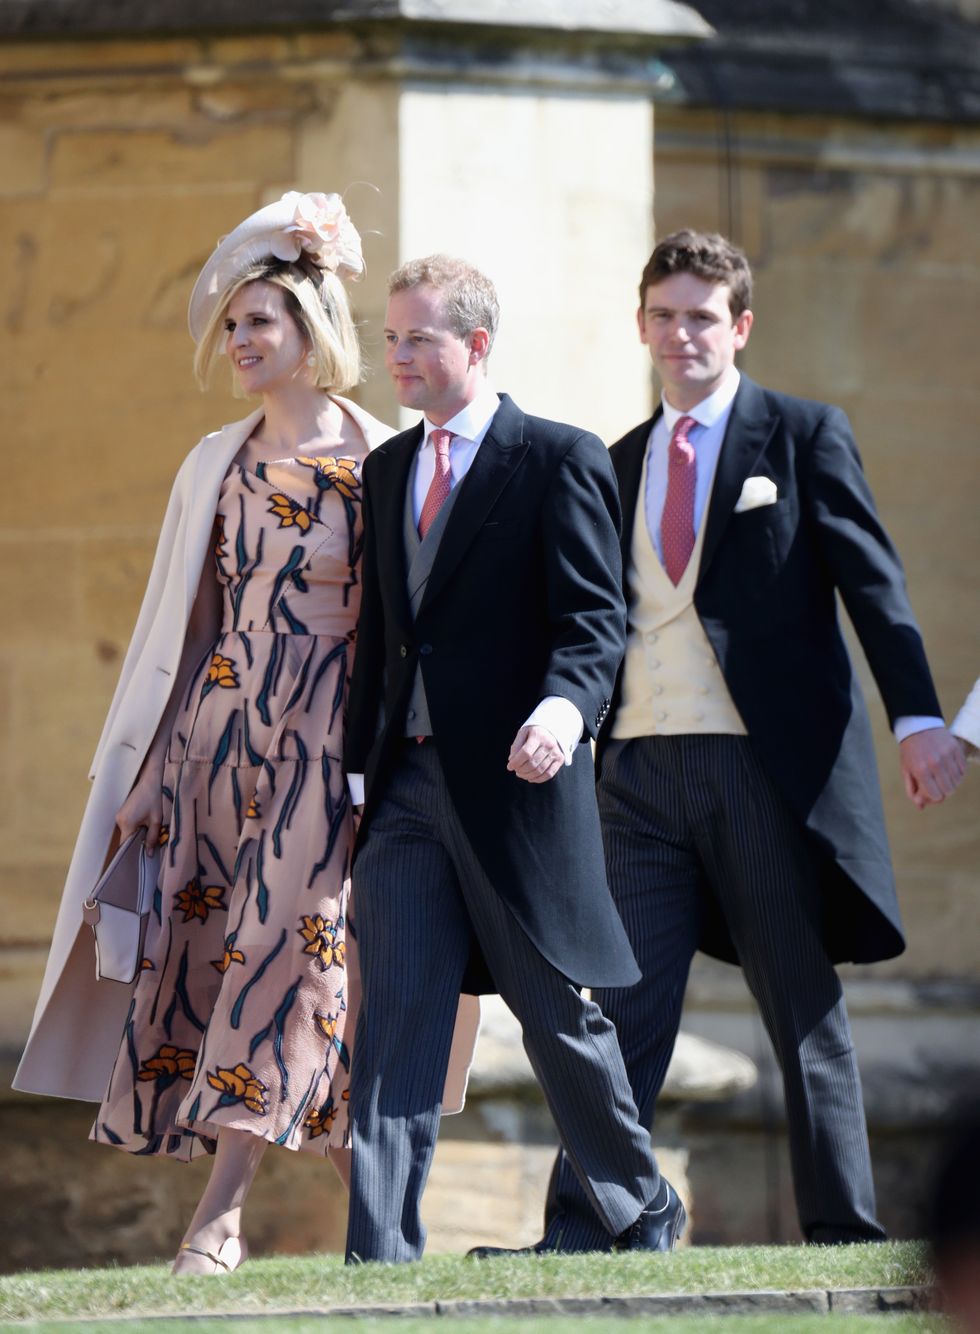 guy pelly centre attending meghan and harry's wedding in 2018, with wife lizzy left and fellow friend of the royals, james meade ﻿right